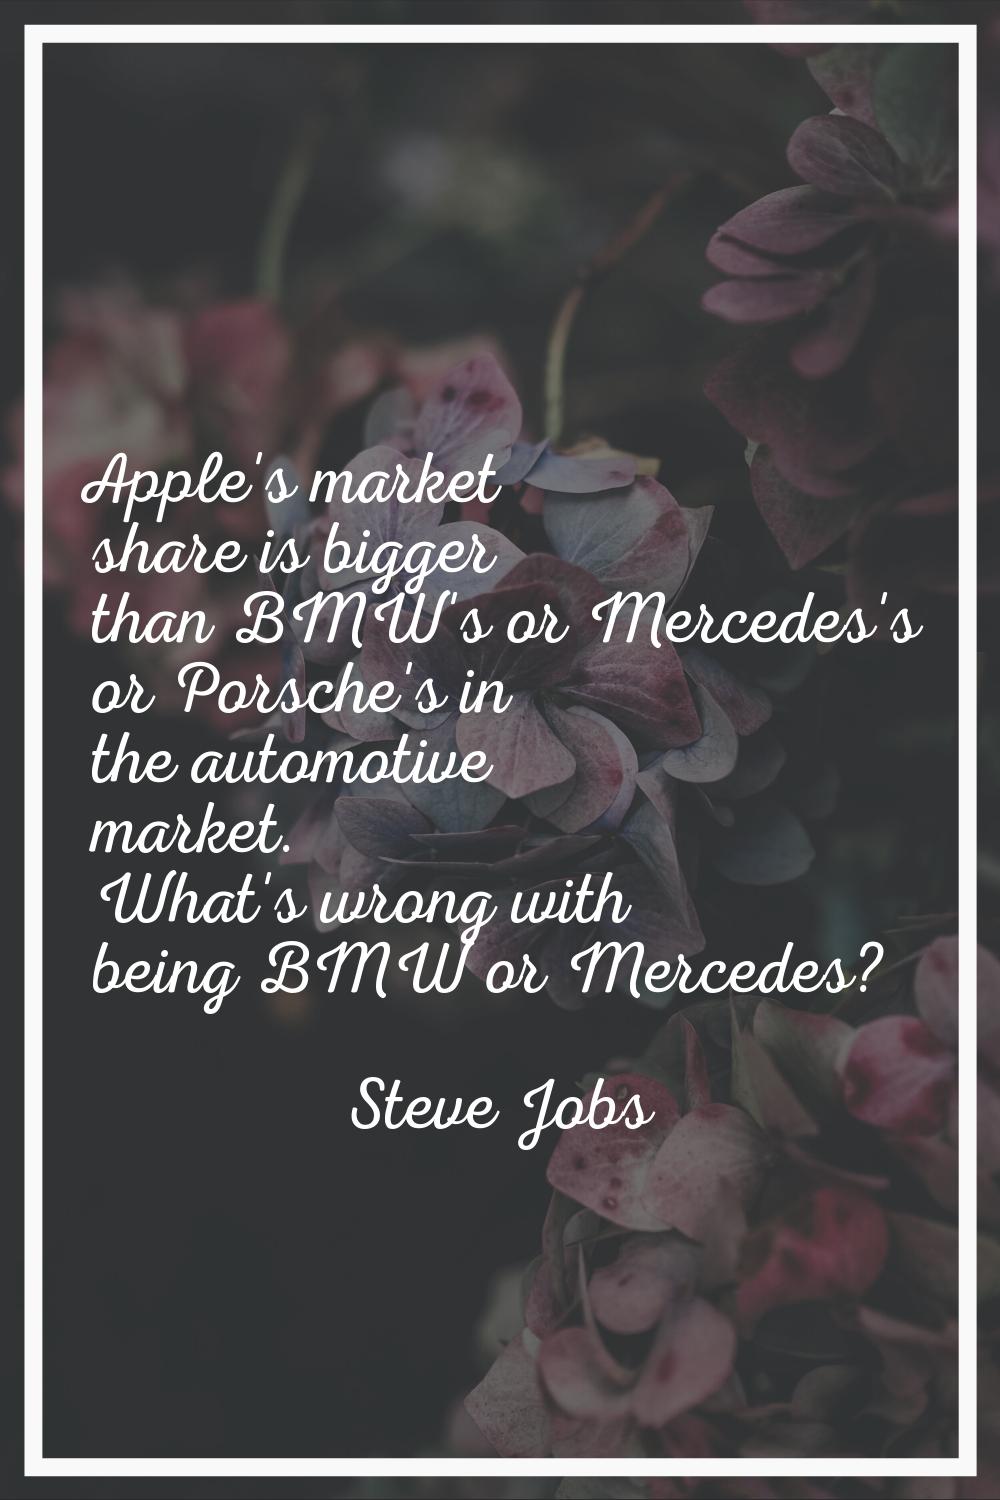 Apple's market share is bigger than BMW's or Mercedes's or Porsche's in the automotive market. What